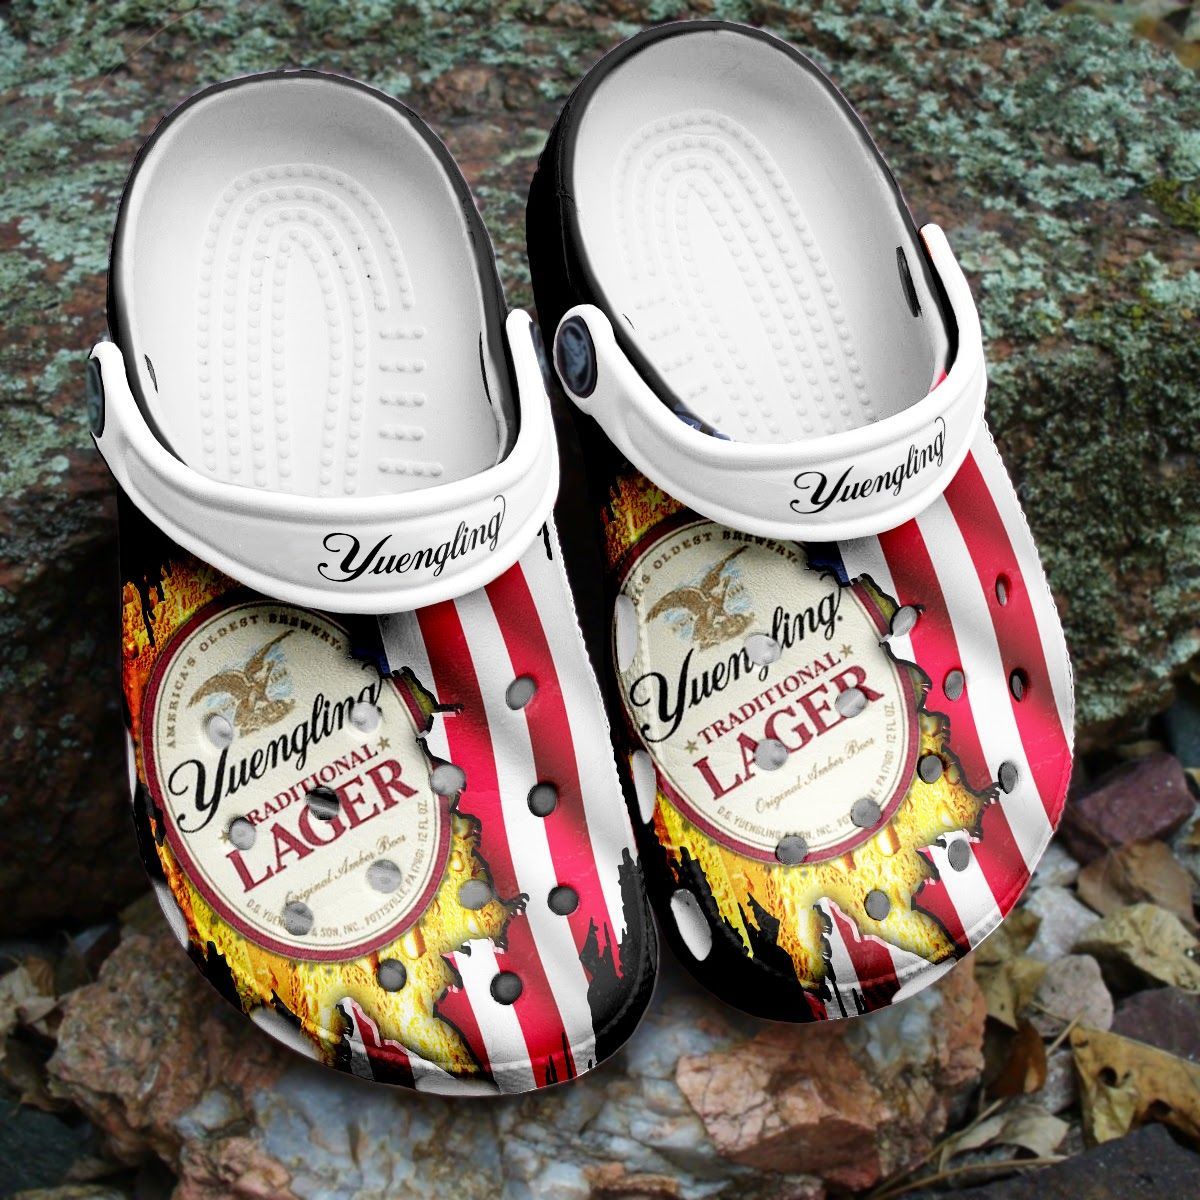 If you'd like to purchase a pair of Crocband Clogs, be sure to check out the official website. 94